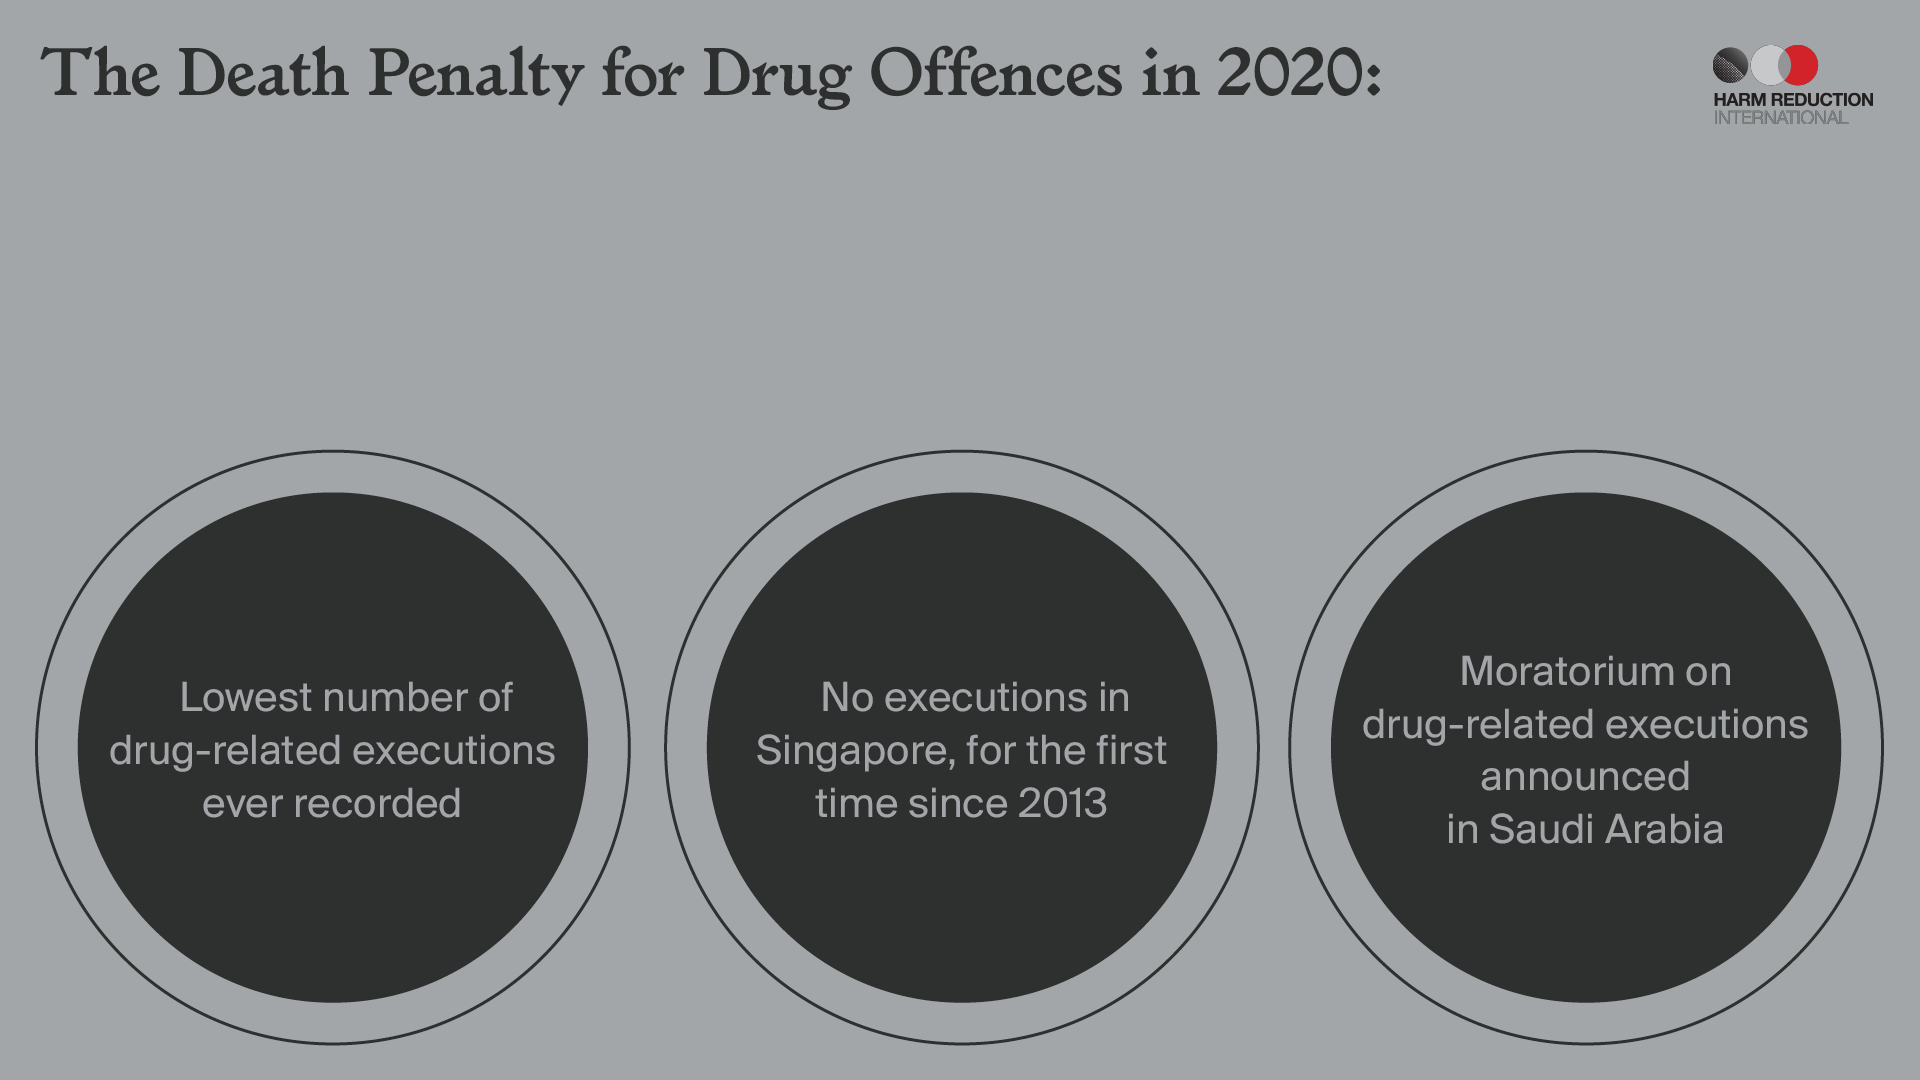 The Death Penalty for Drug Offences in 2020